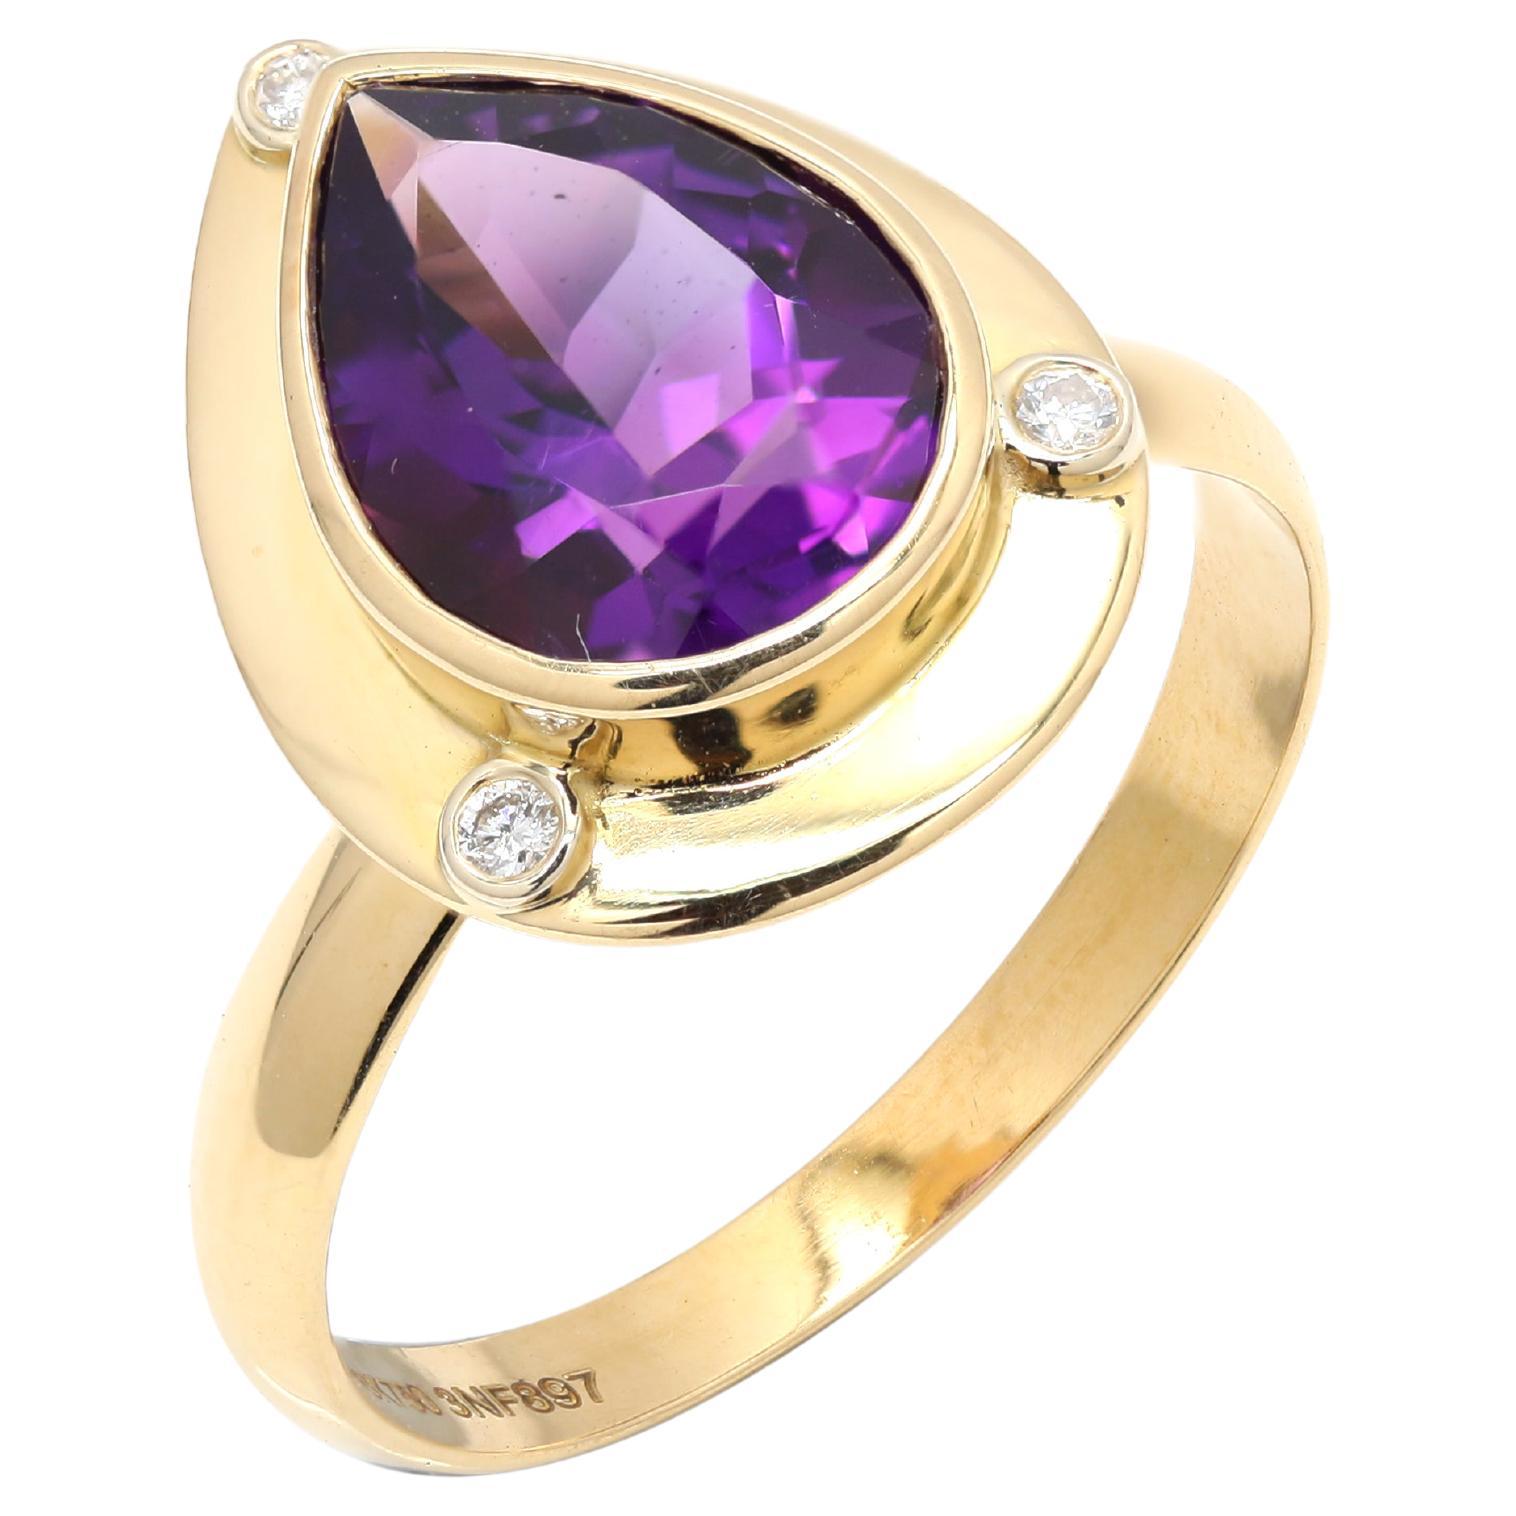 Estelar 2.45ct Amethyst Ring with Diamonds Mounted with 18k Yellow Gold